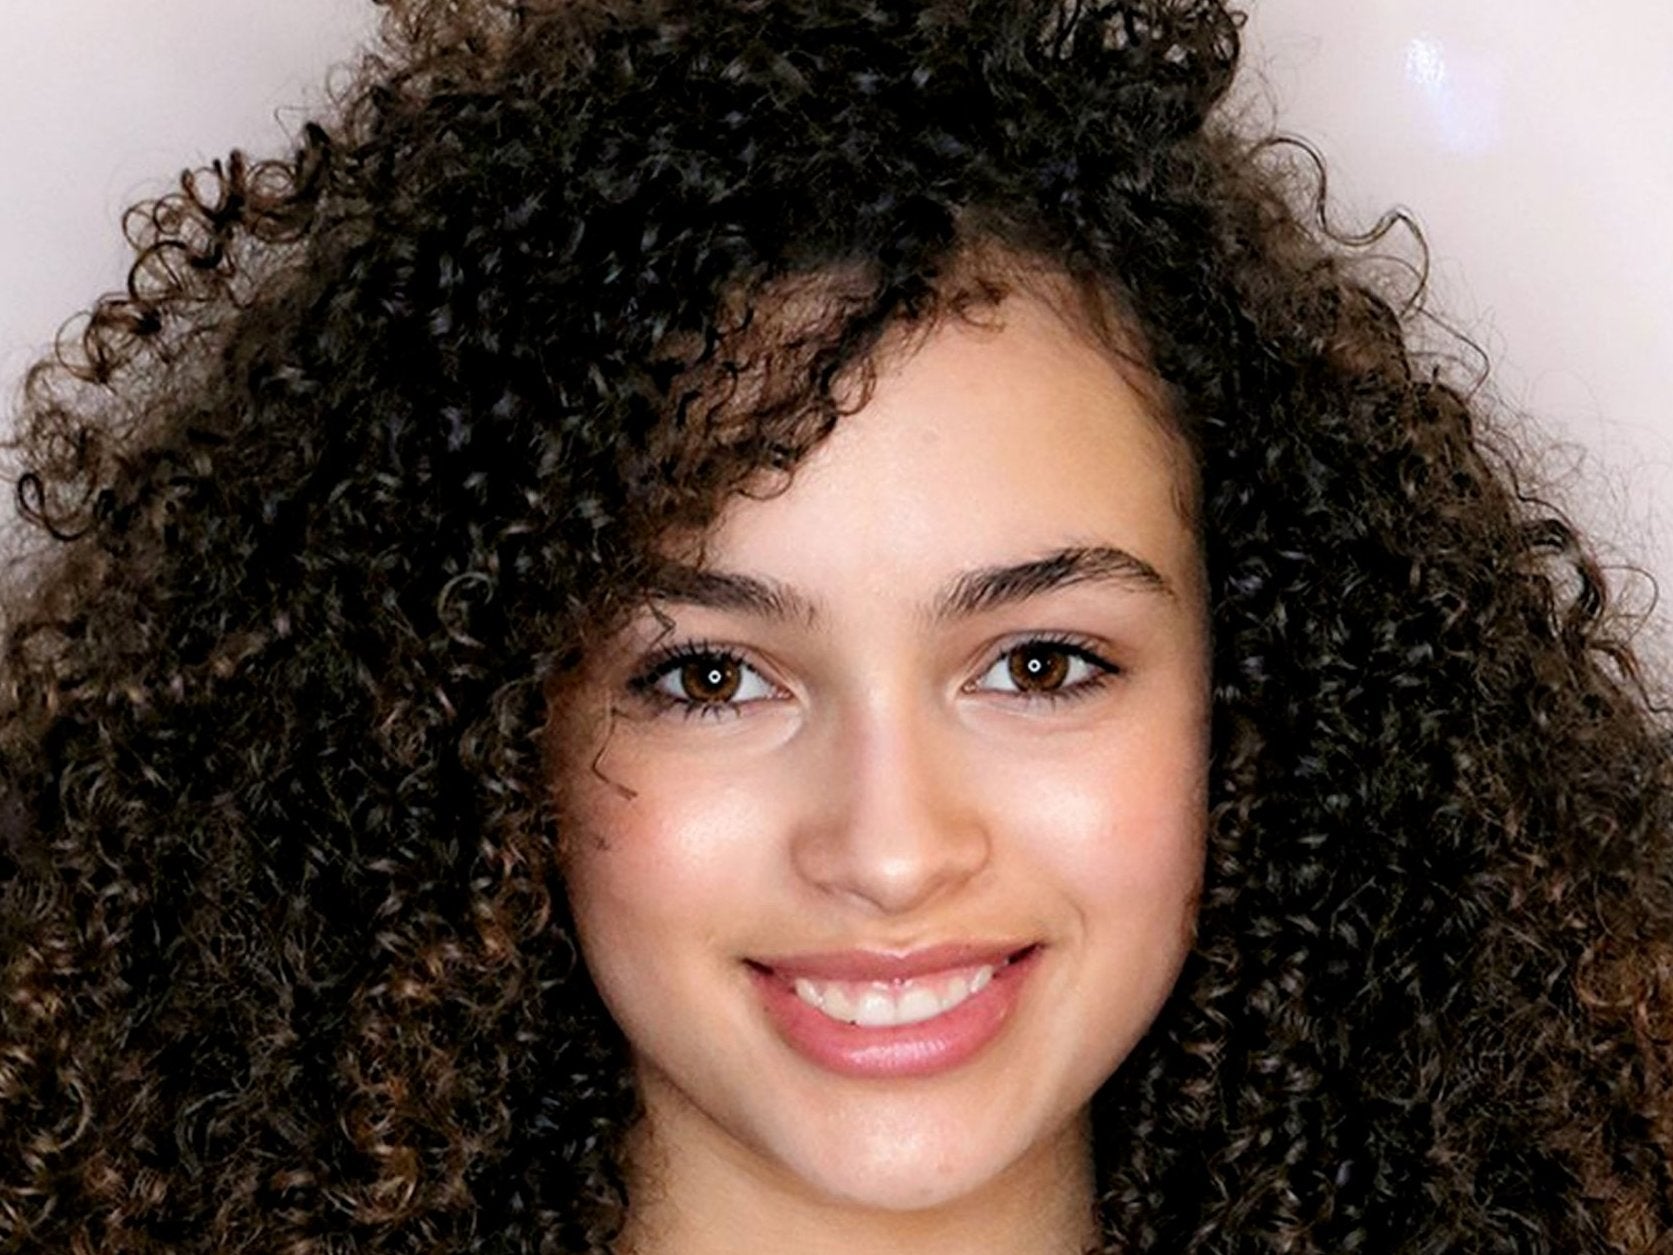 Mya-Lecia Naylor death: 16-year-old CBBC star of Almost Never and Millie Inbetween has died